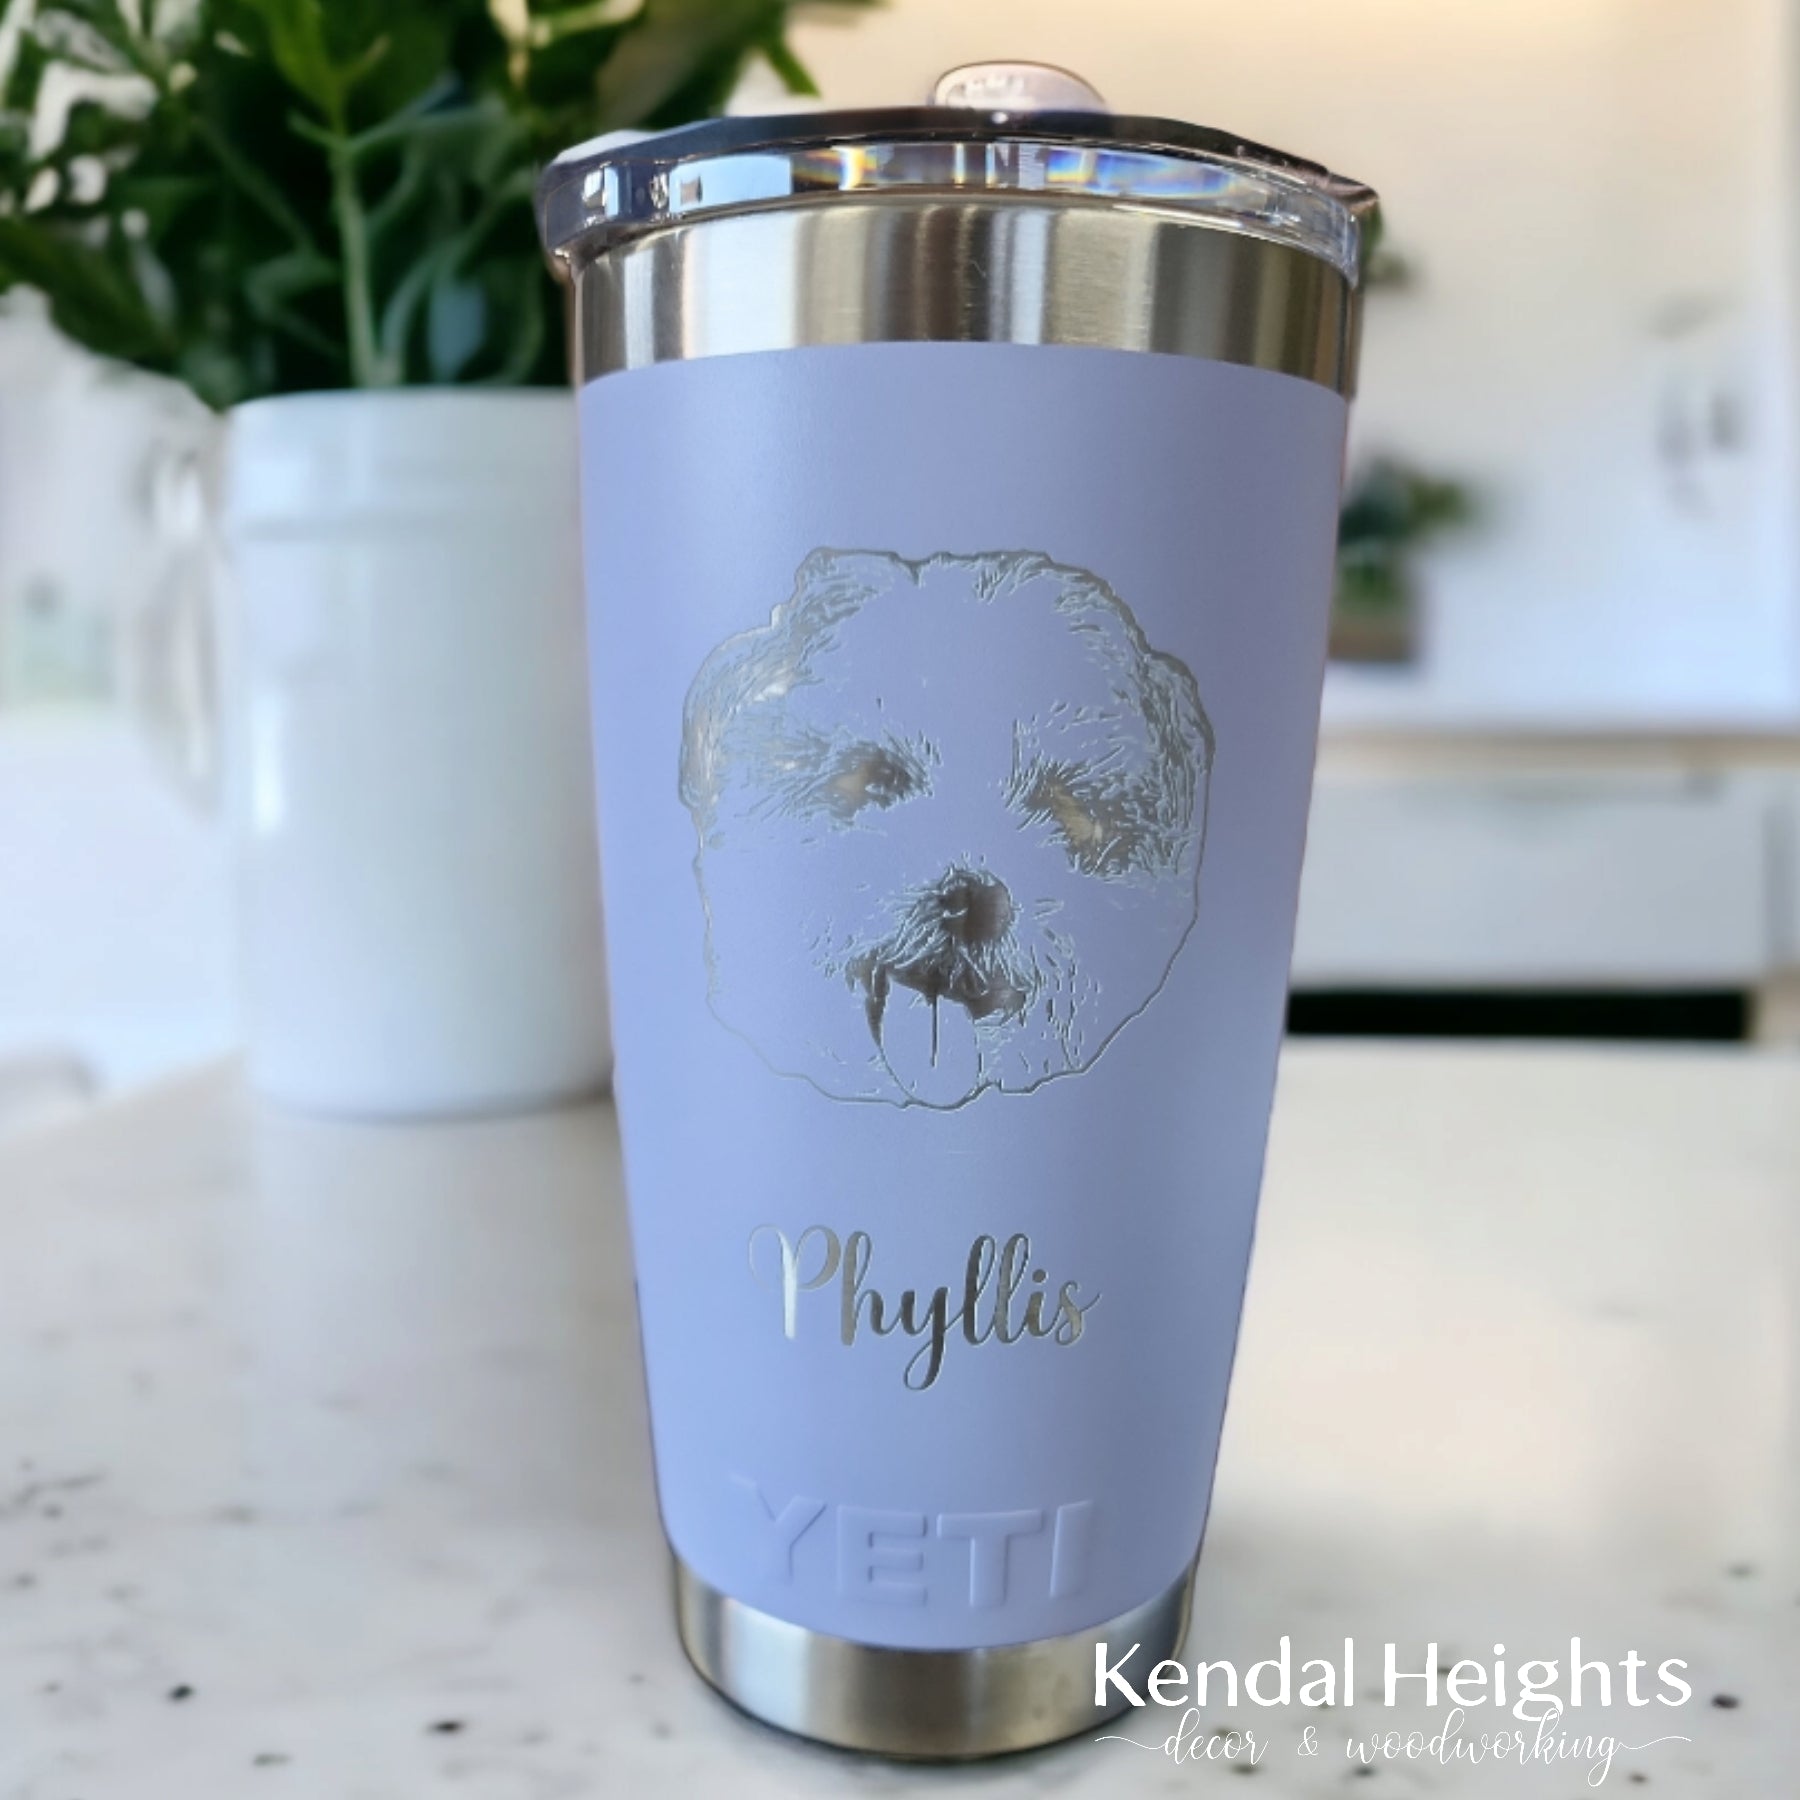 Personalized White Yeti Realtor 20oz Tumbler (w/Yeti options)  - 85 themes for sports, jobs, hobbies, celebrations - shop us for tumbler,  decanter, coasters, beer mug - Customized: Tumblers & Water Glasses